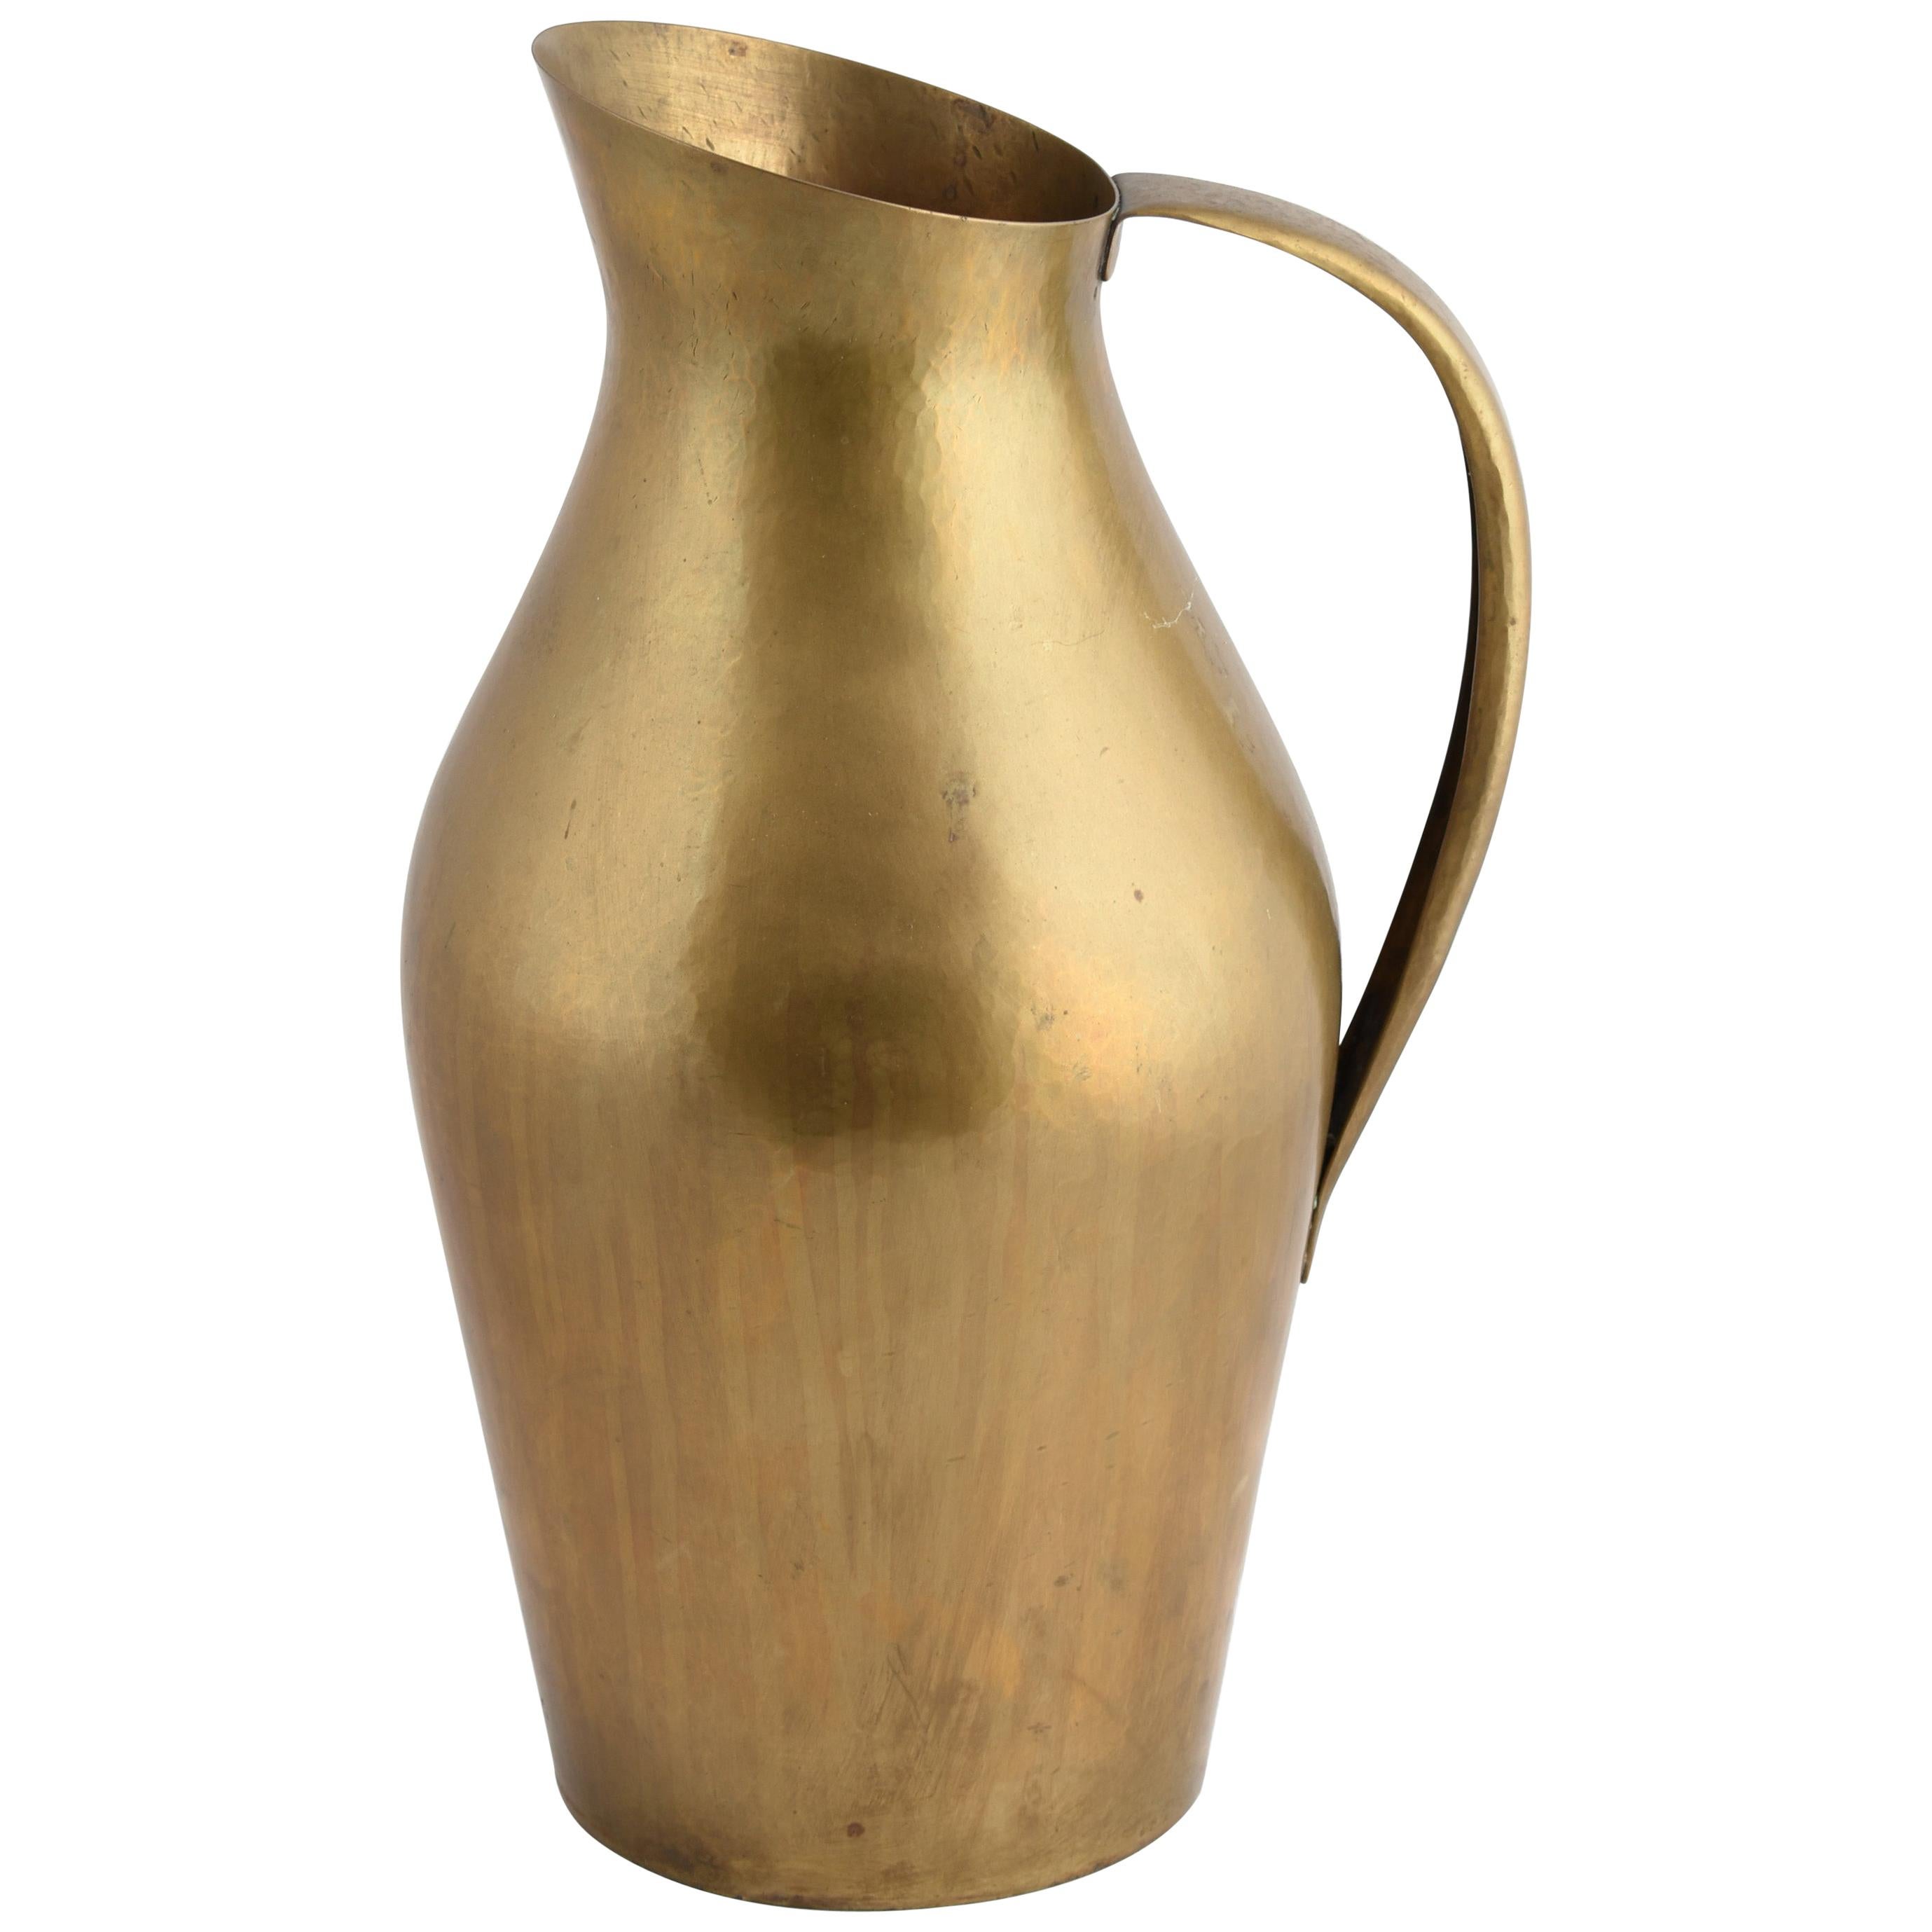 Vintage Large Brass Pitcher/Vase with Handles by Hayno Focken, Germany, 1930s